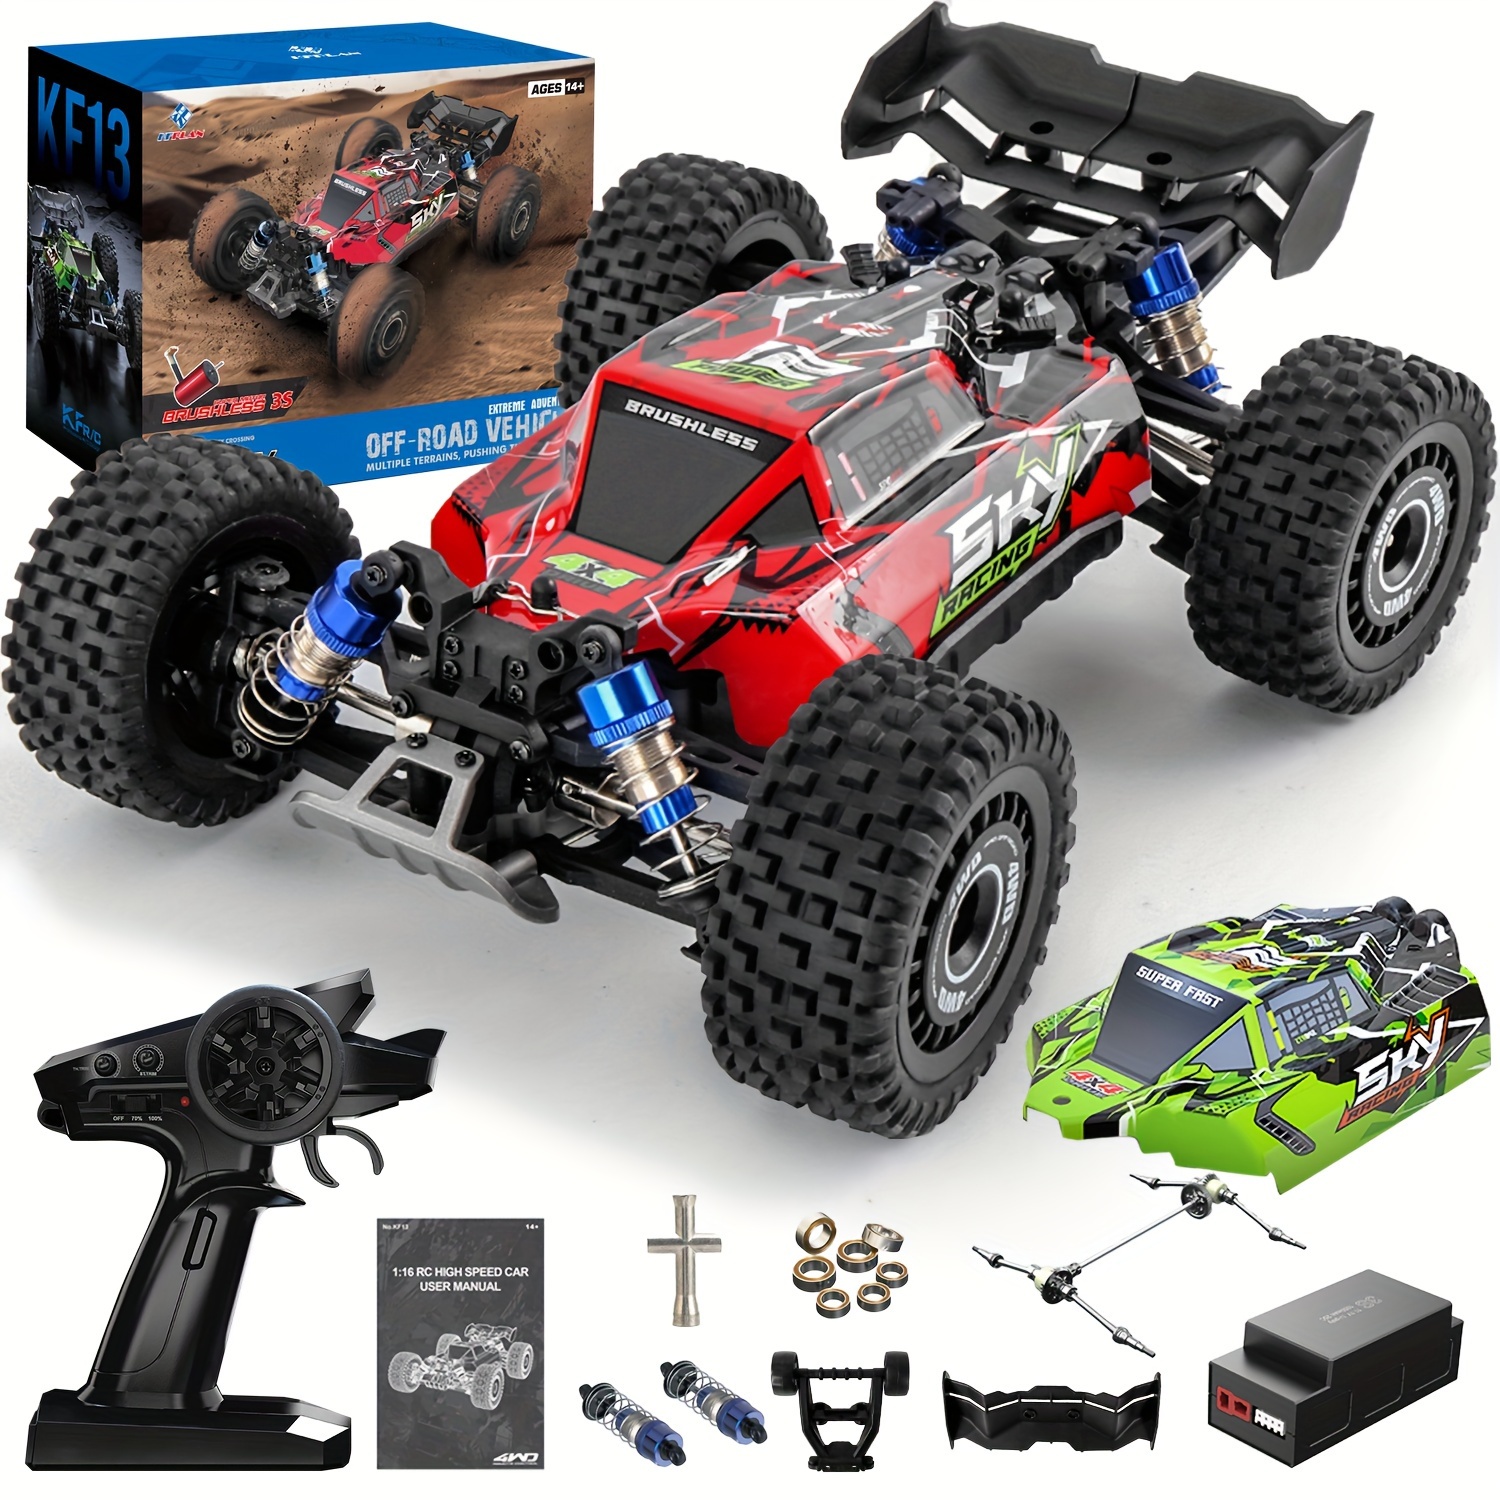 

Kf13 Remote Control High-speed 1:16 Off-road Vehicle Powerful Brushless Motor Four-wheel Drive 62km\h Multi-race Racing Toy Race Car